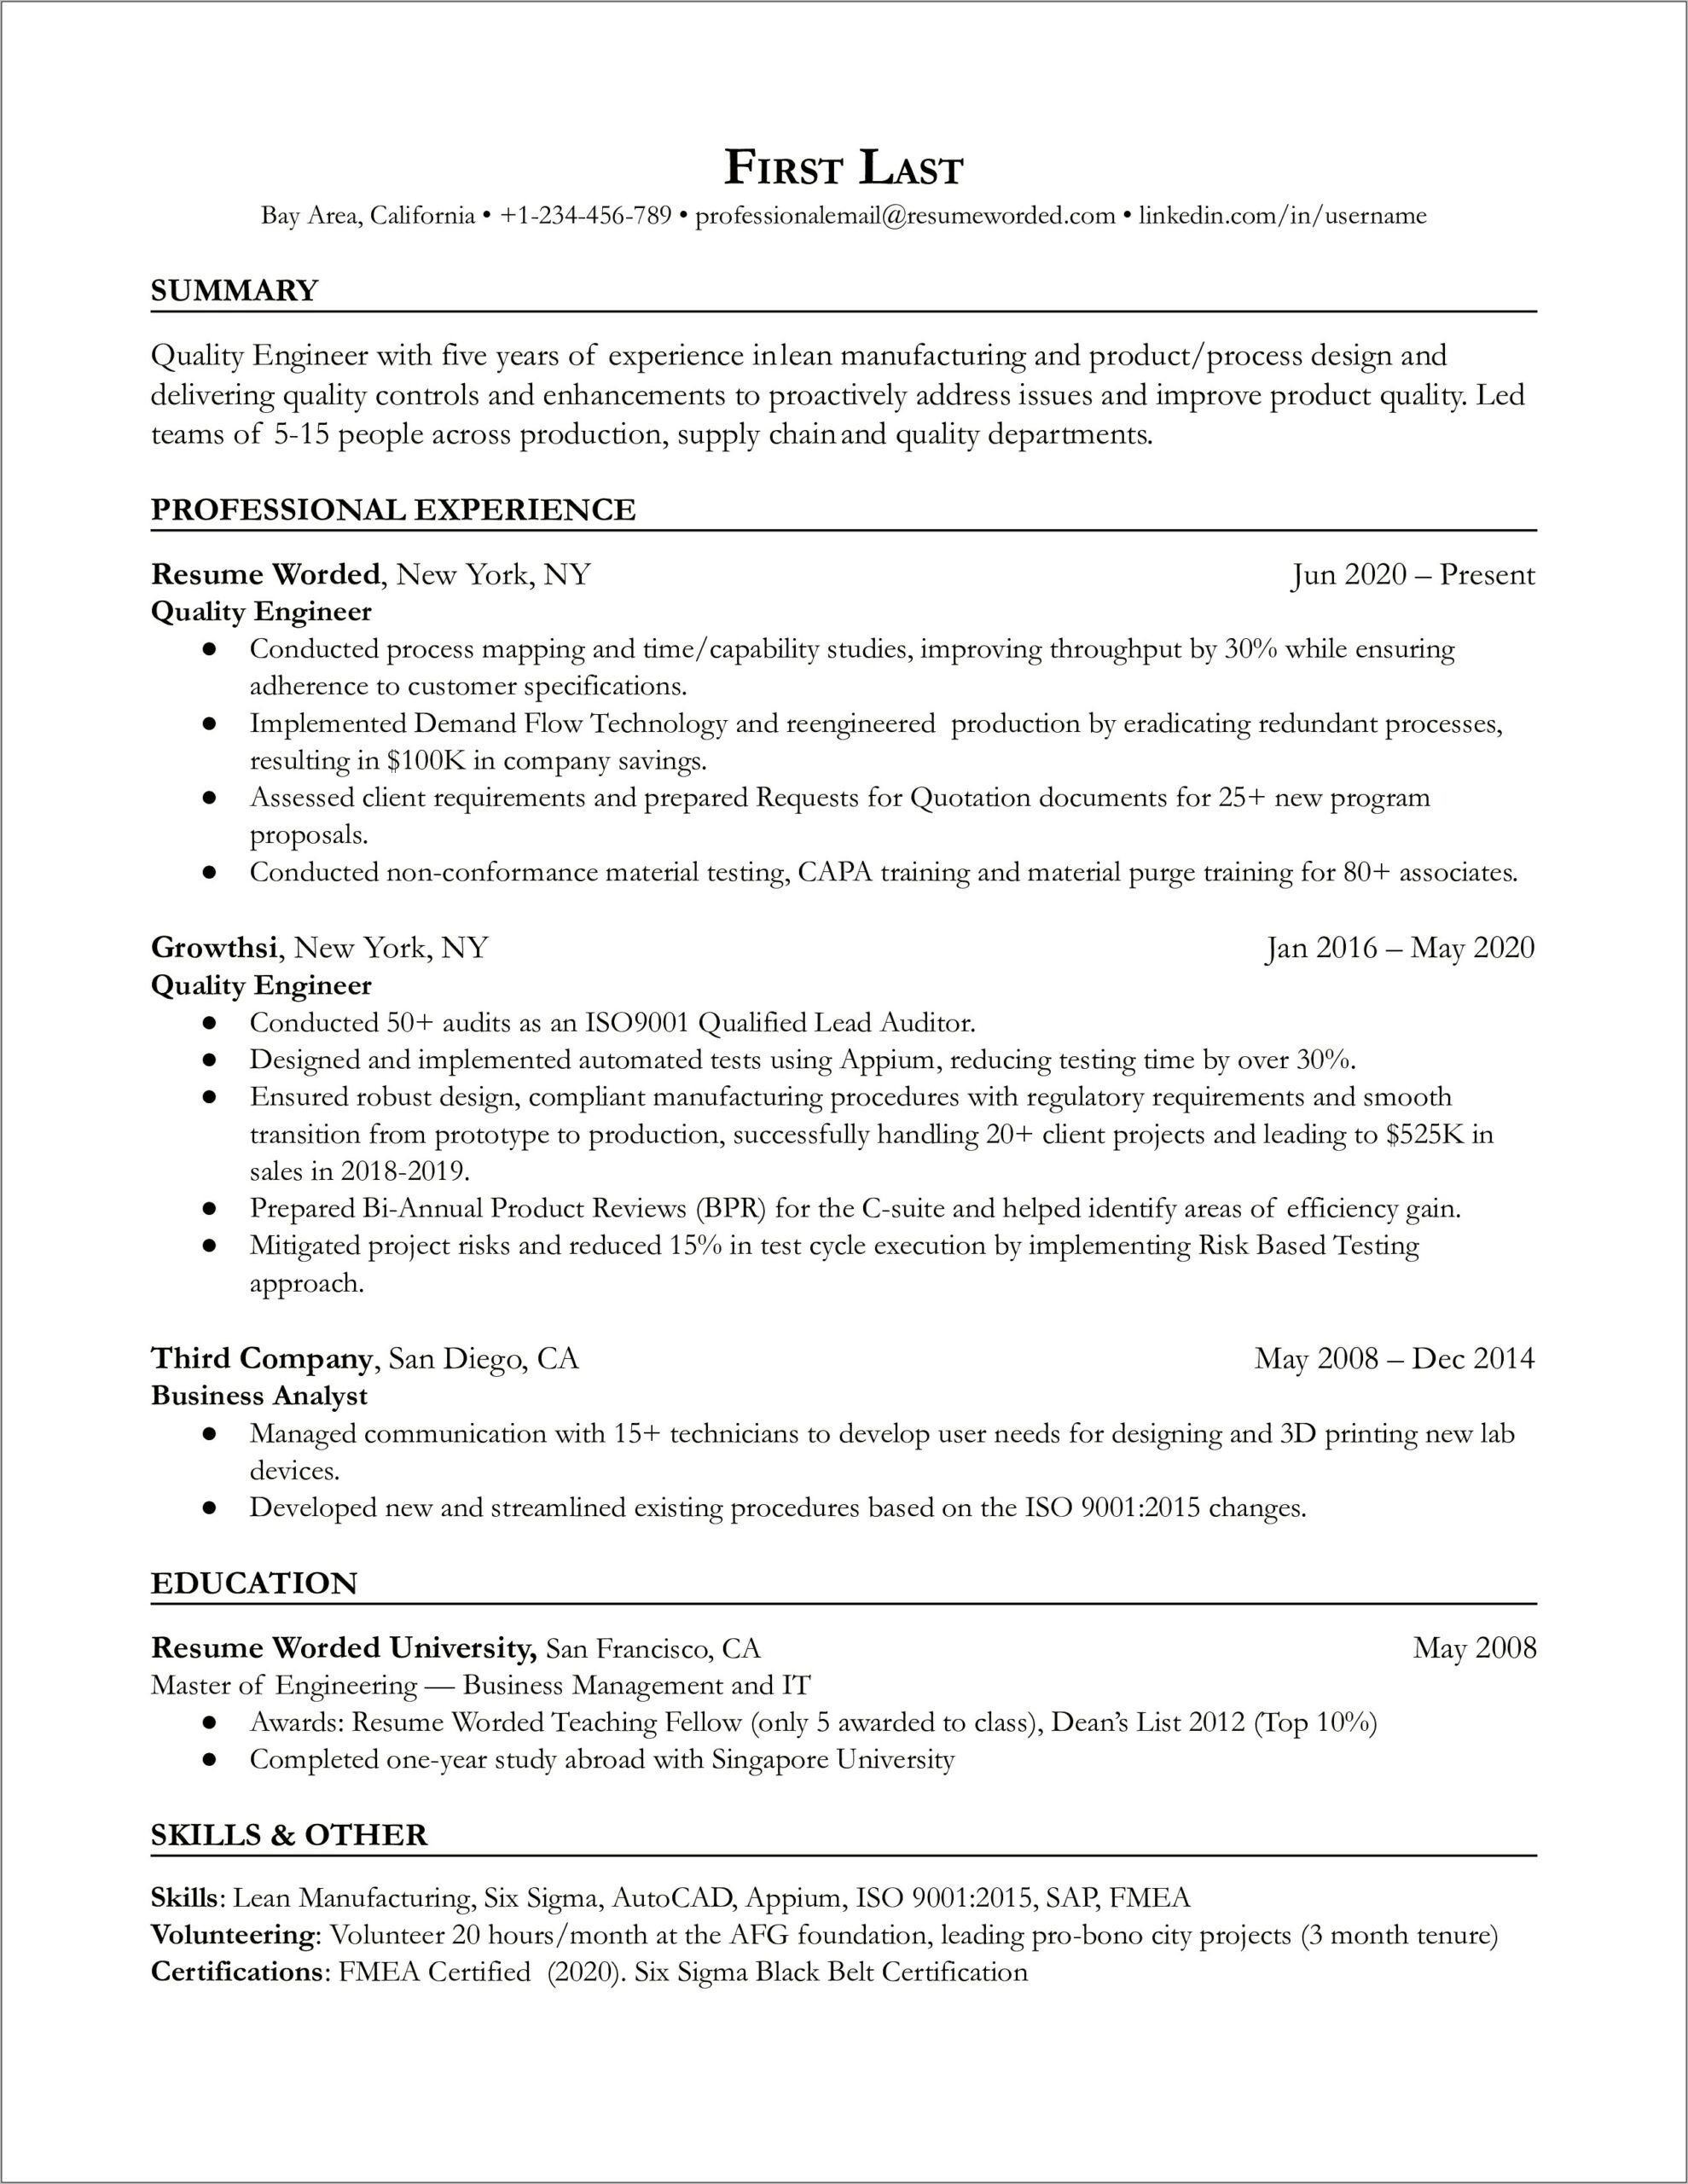 Sample Resume For Material Specialist